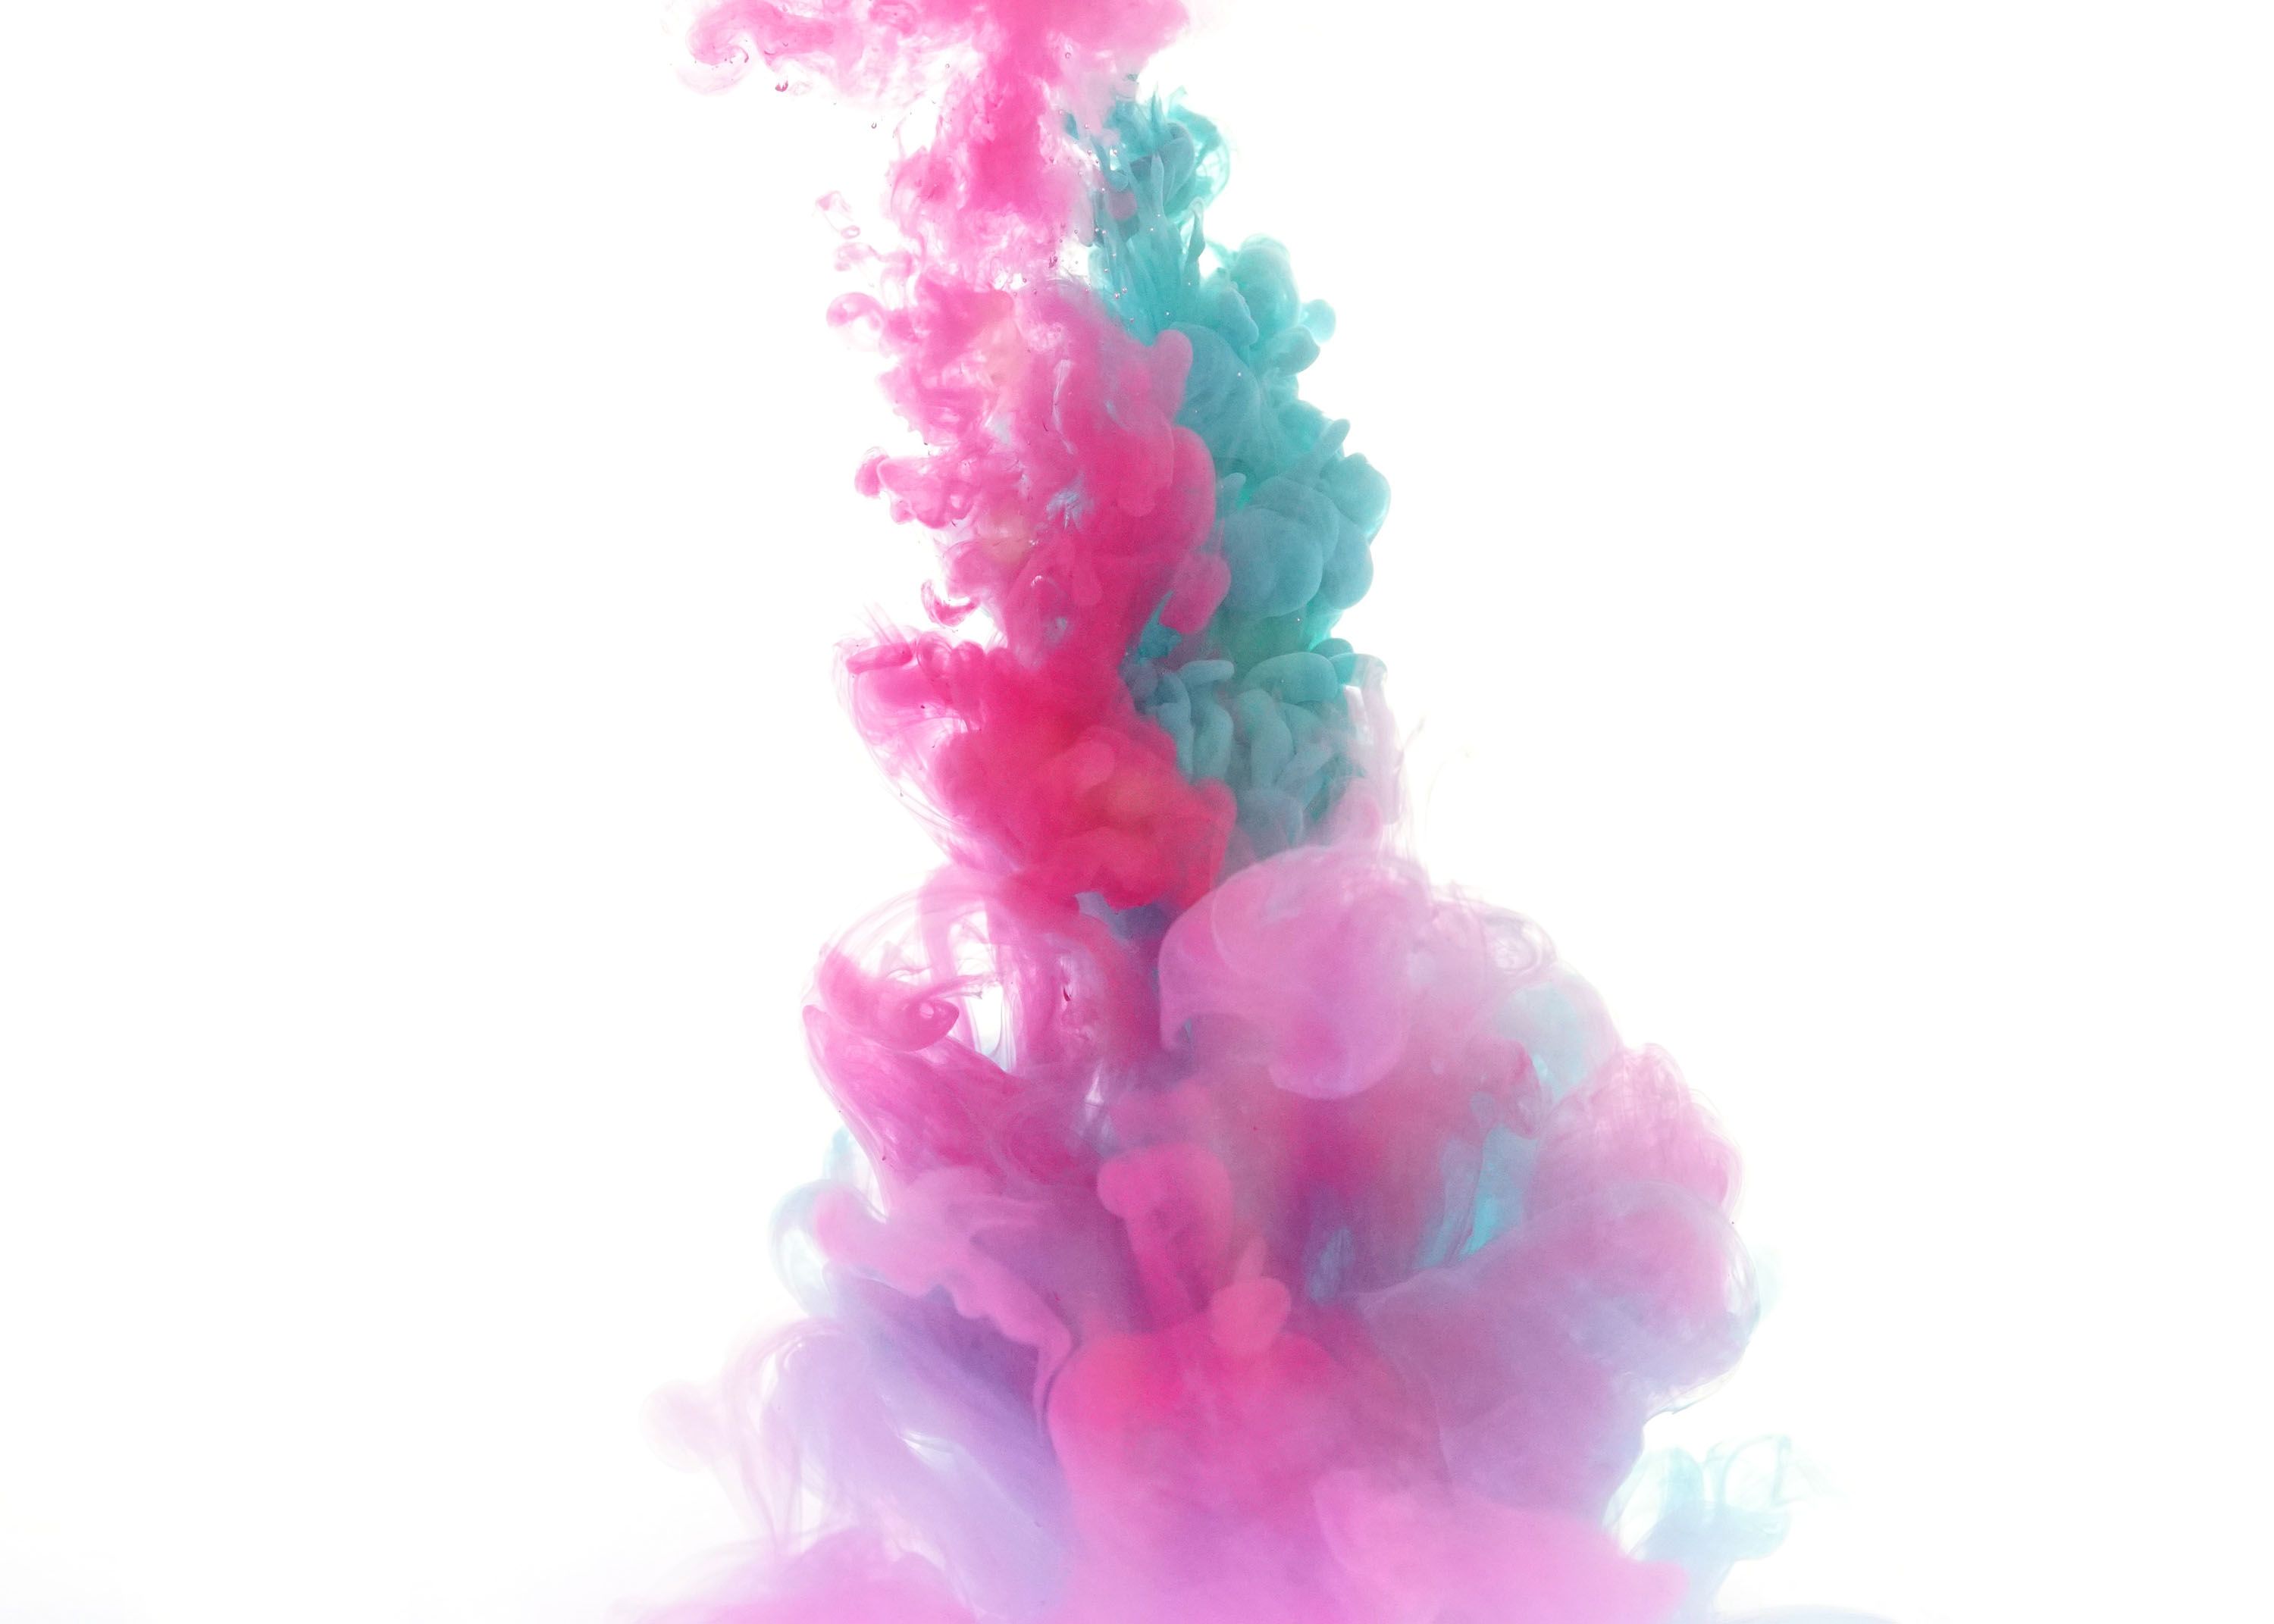 Wallpaper of Colors, Smoke, Abstract background & HD image